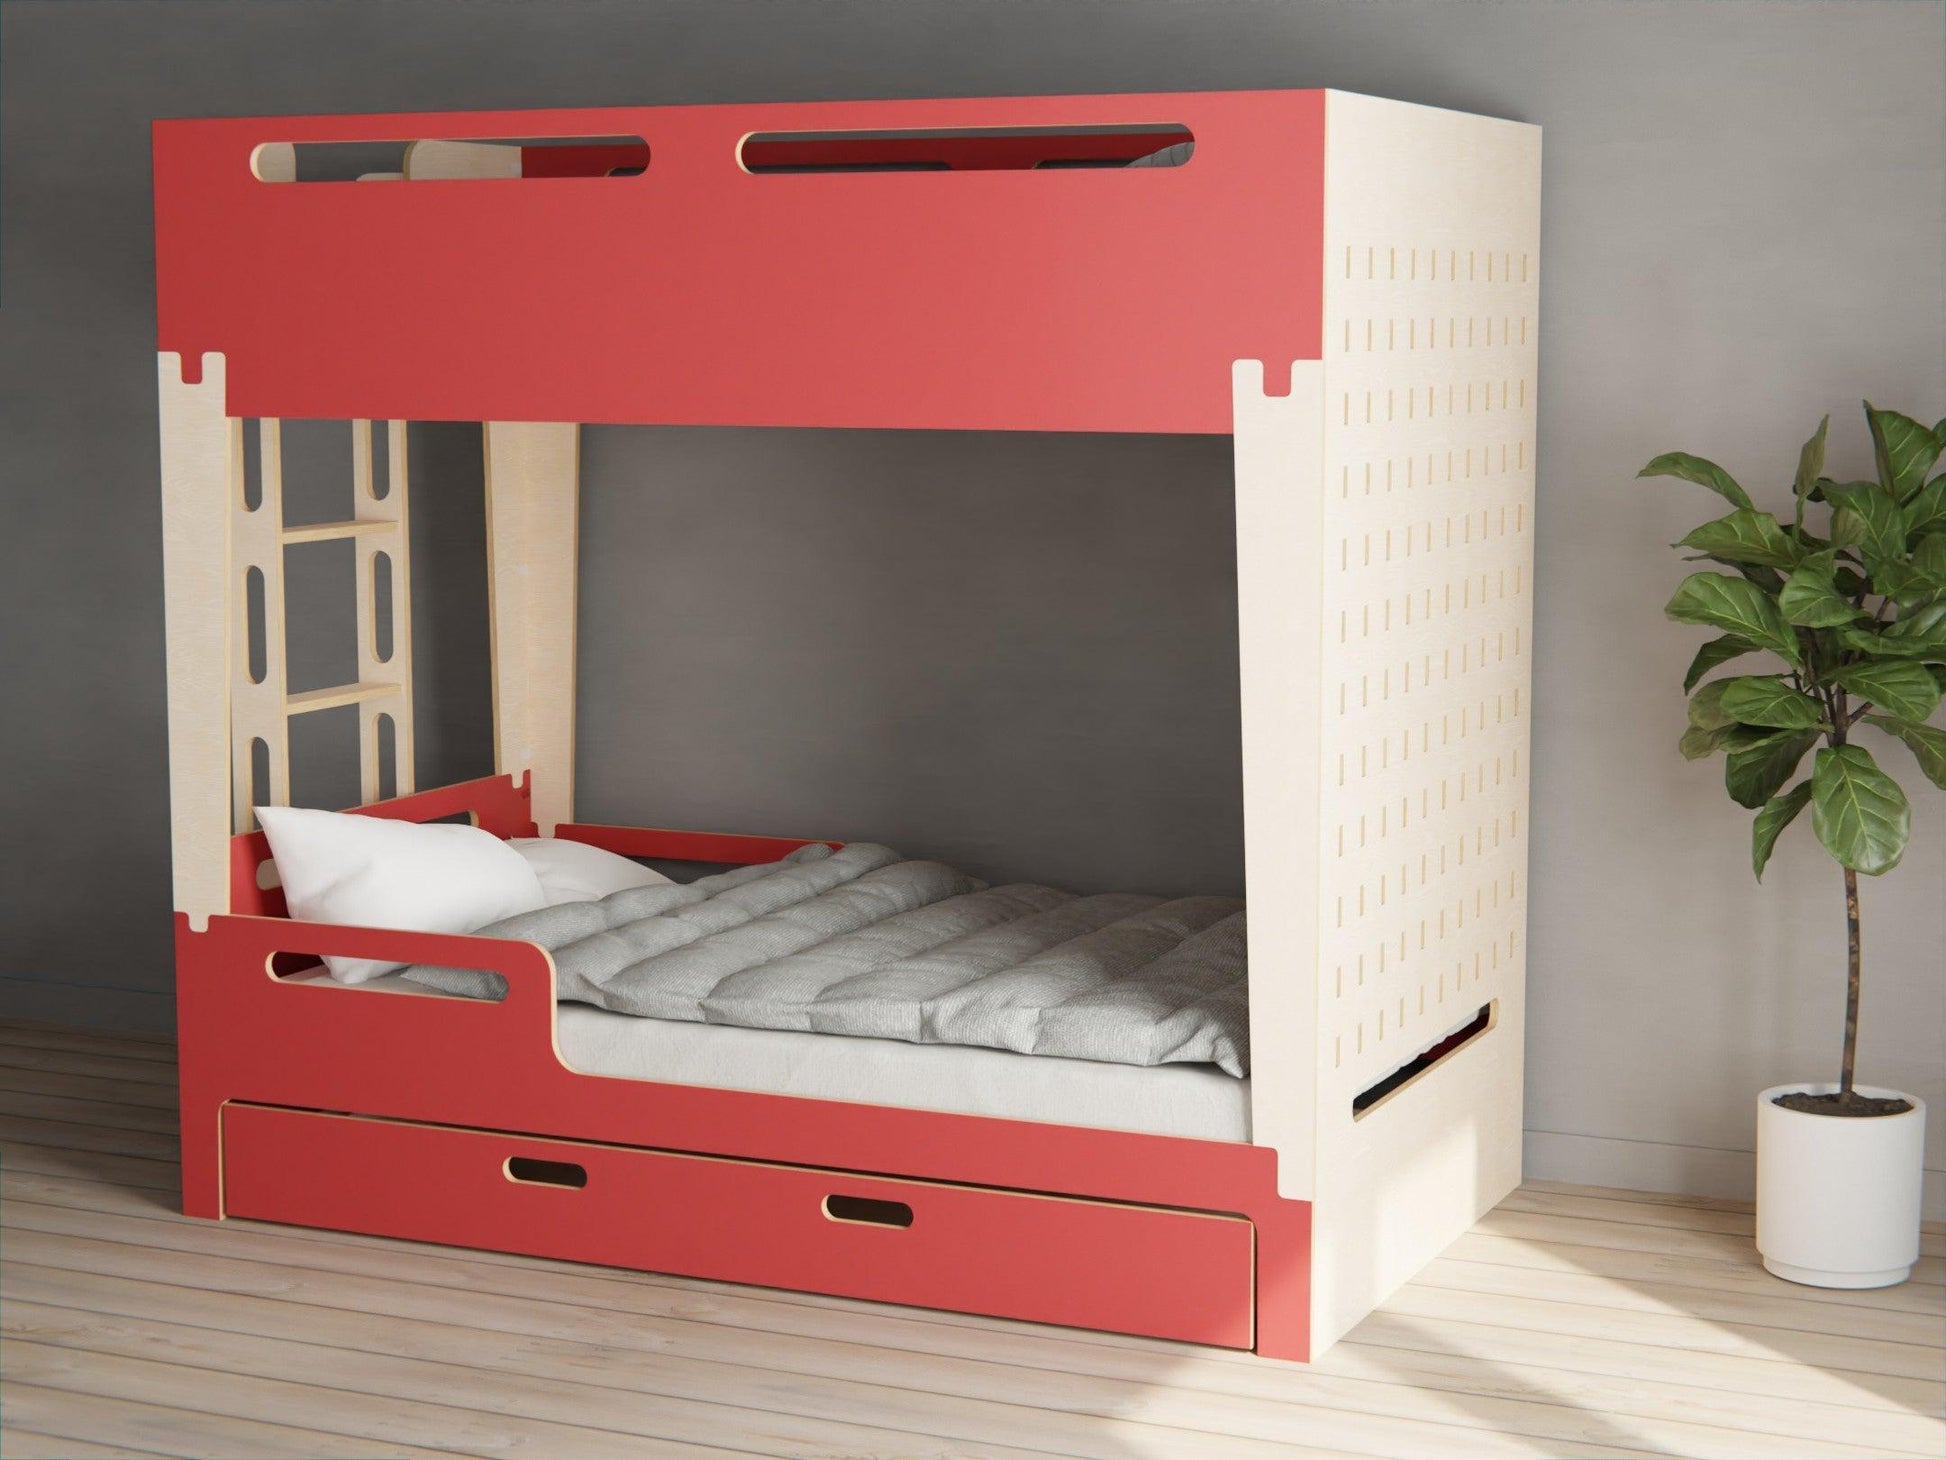 Revamp your space with our Scandinavian-style plywood bunk beds. Complete with storage drawer. Available in red colour.